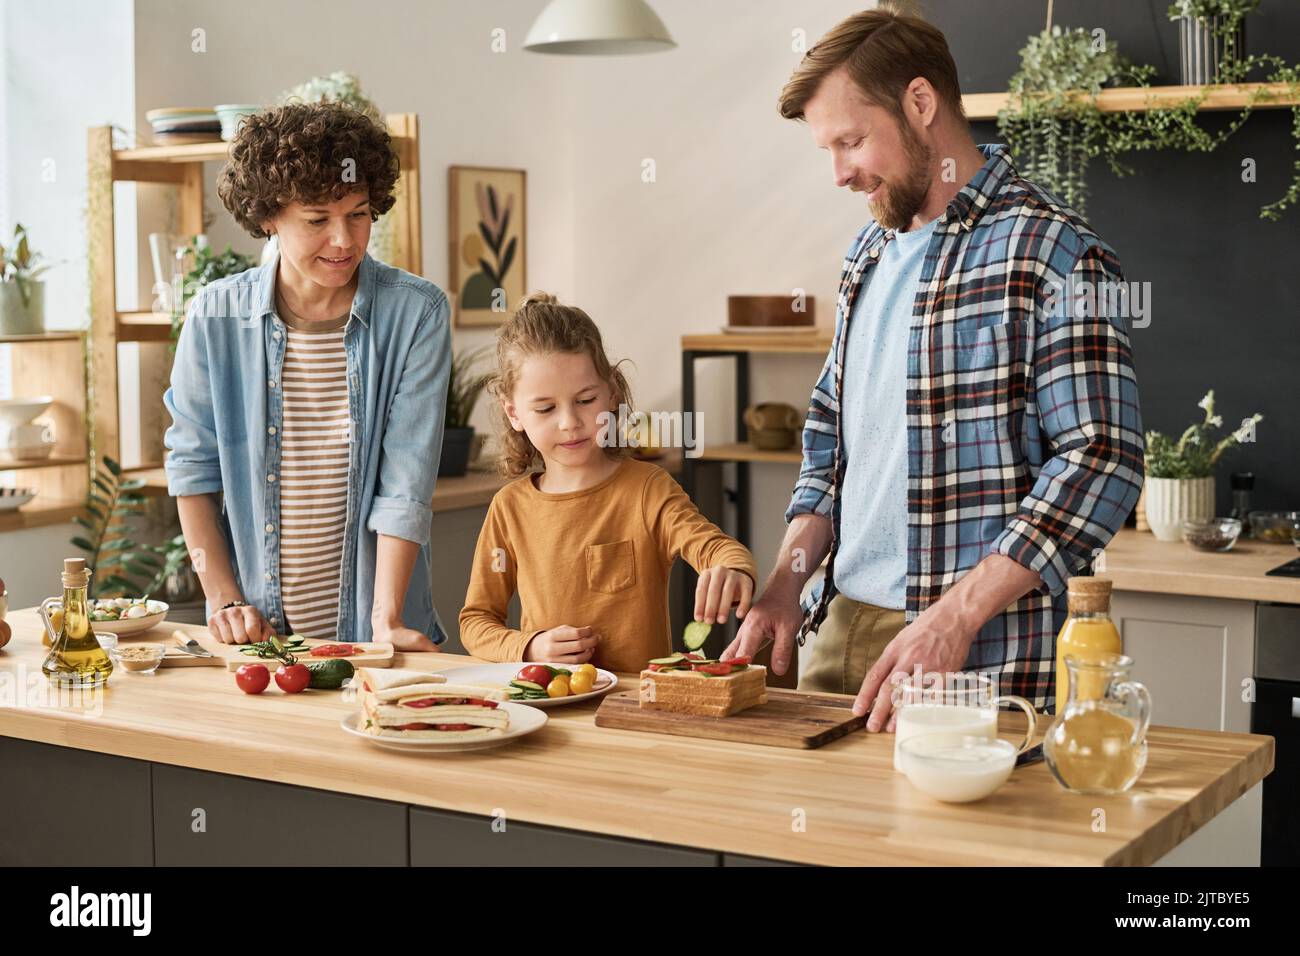 Little boy putting fresh vegetables on bread to cook sandwiches together with his parents in kitchen Stock Photo